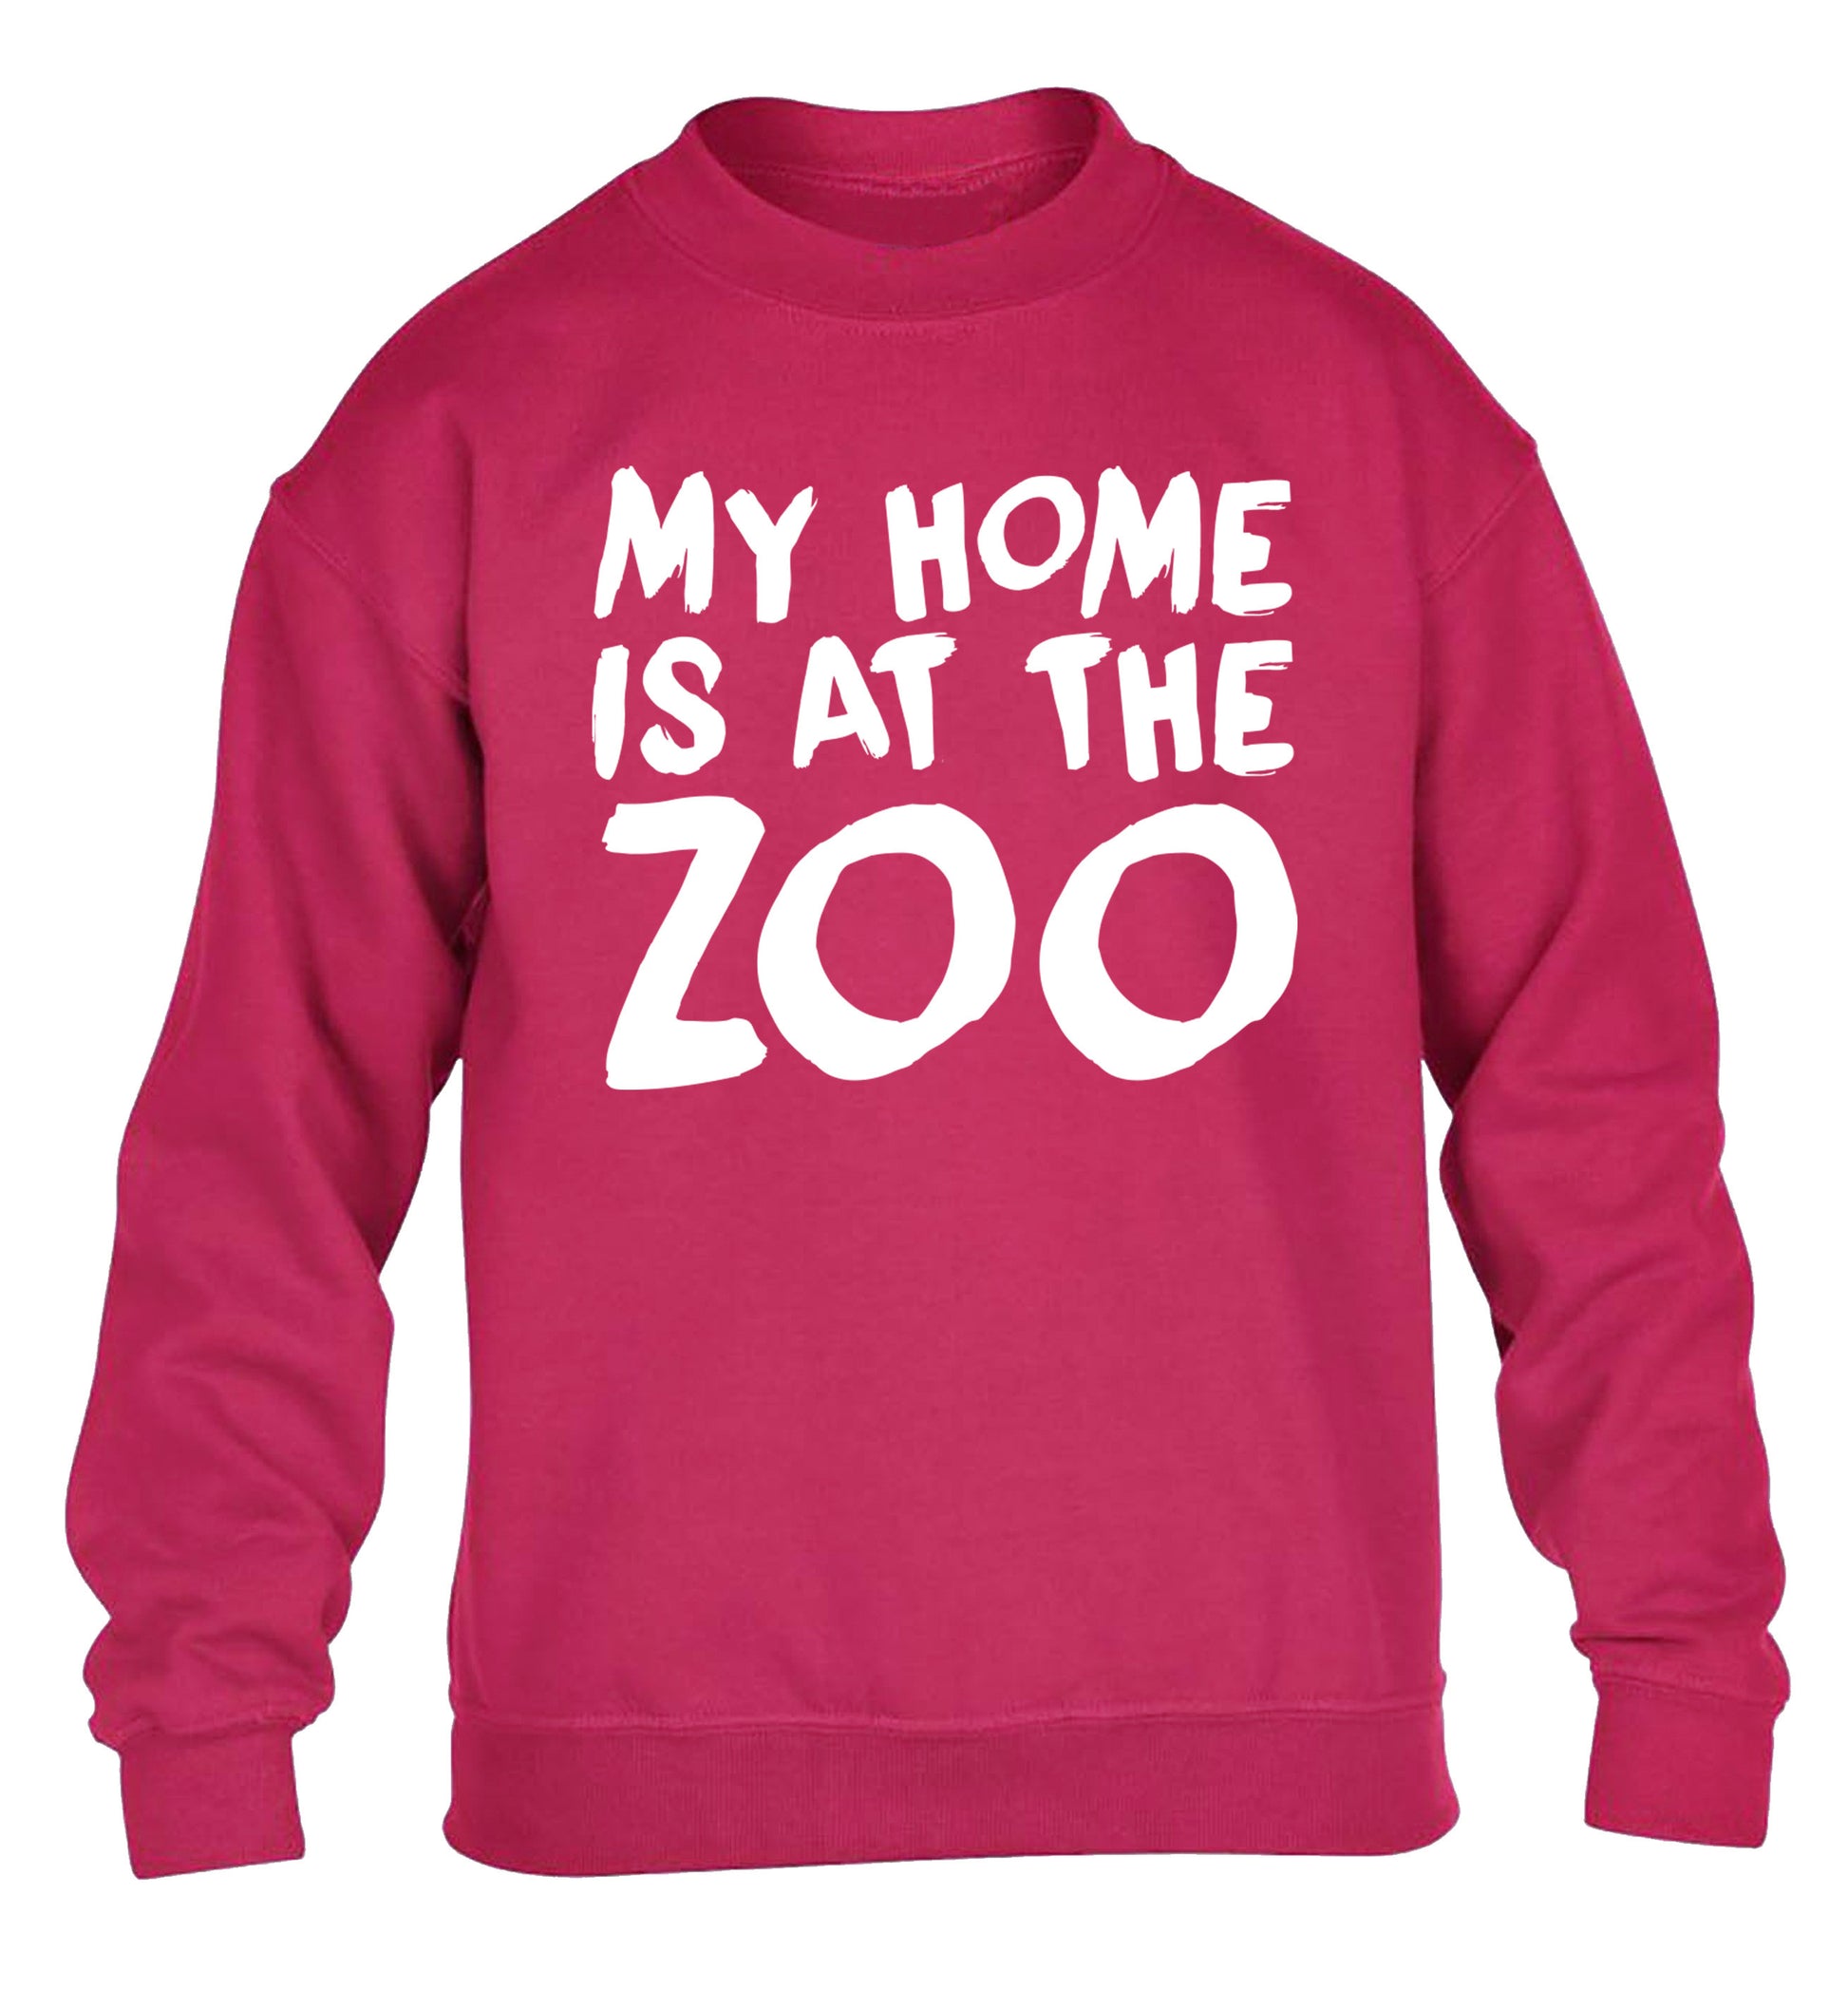 My home is at the zoo children's pink sweater 12-14 Years